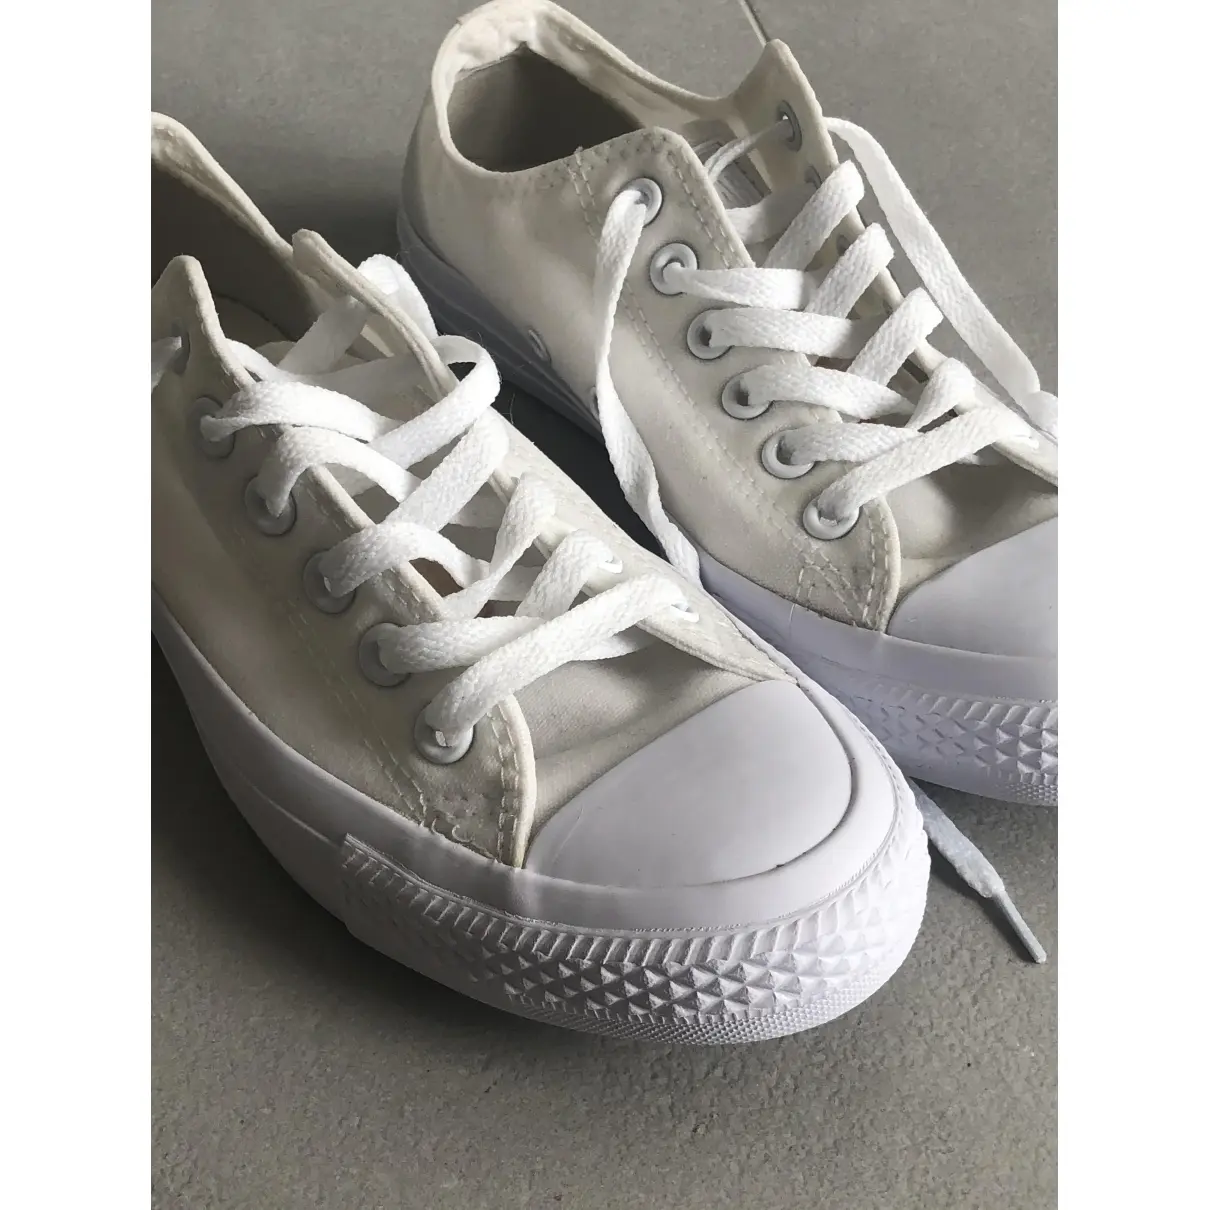 Converse Cloth trainers for sale